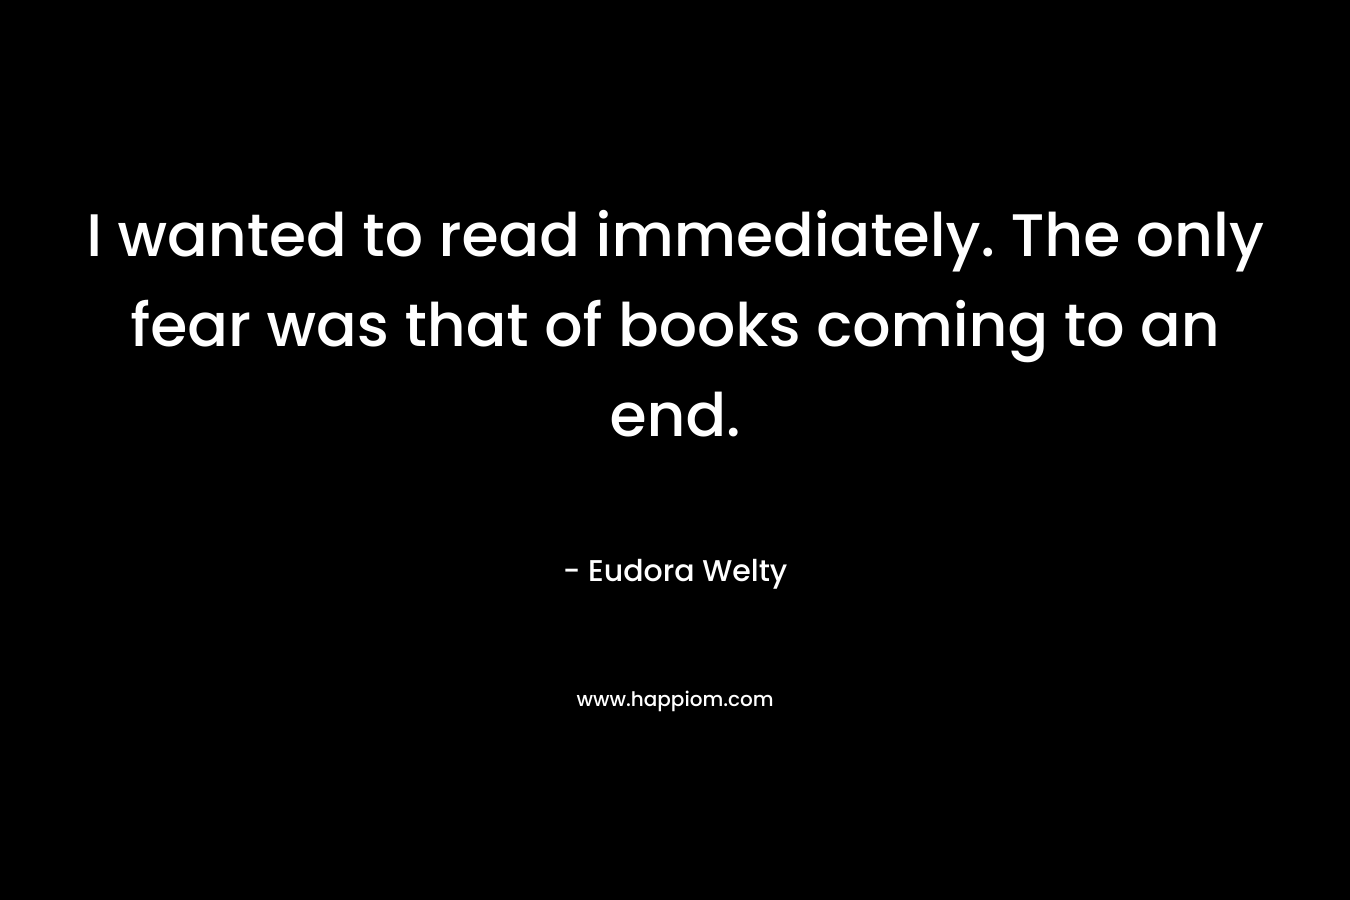 I wanted to read immediately. The only fear was that of books coming to an end. – Eudora Welty